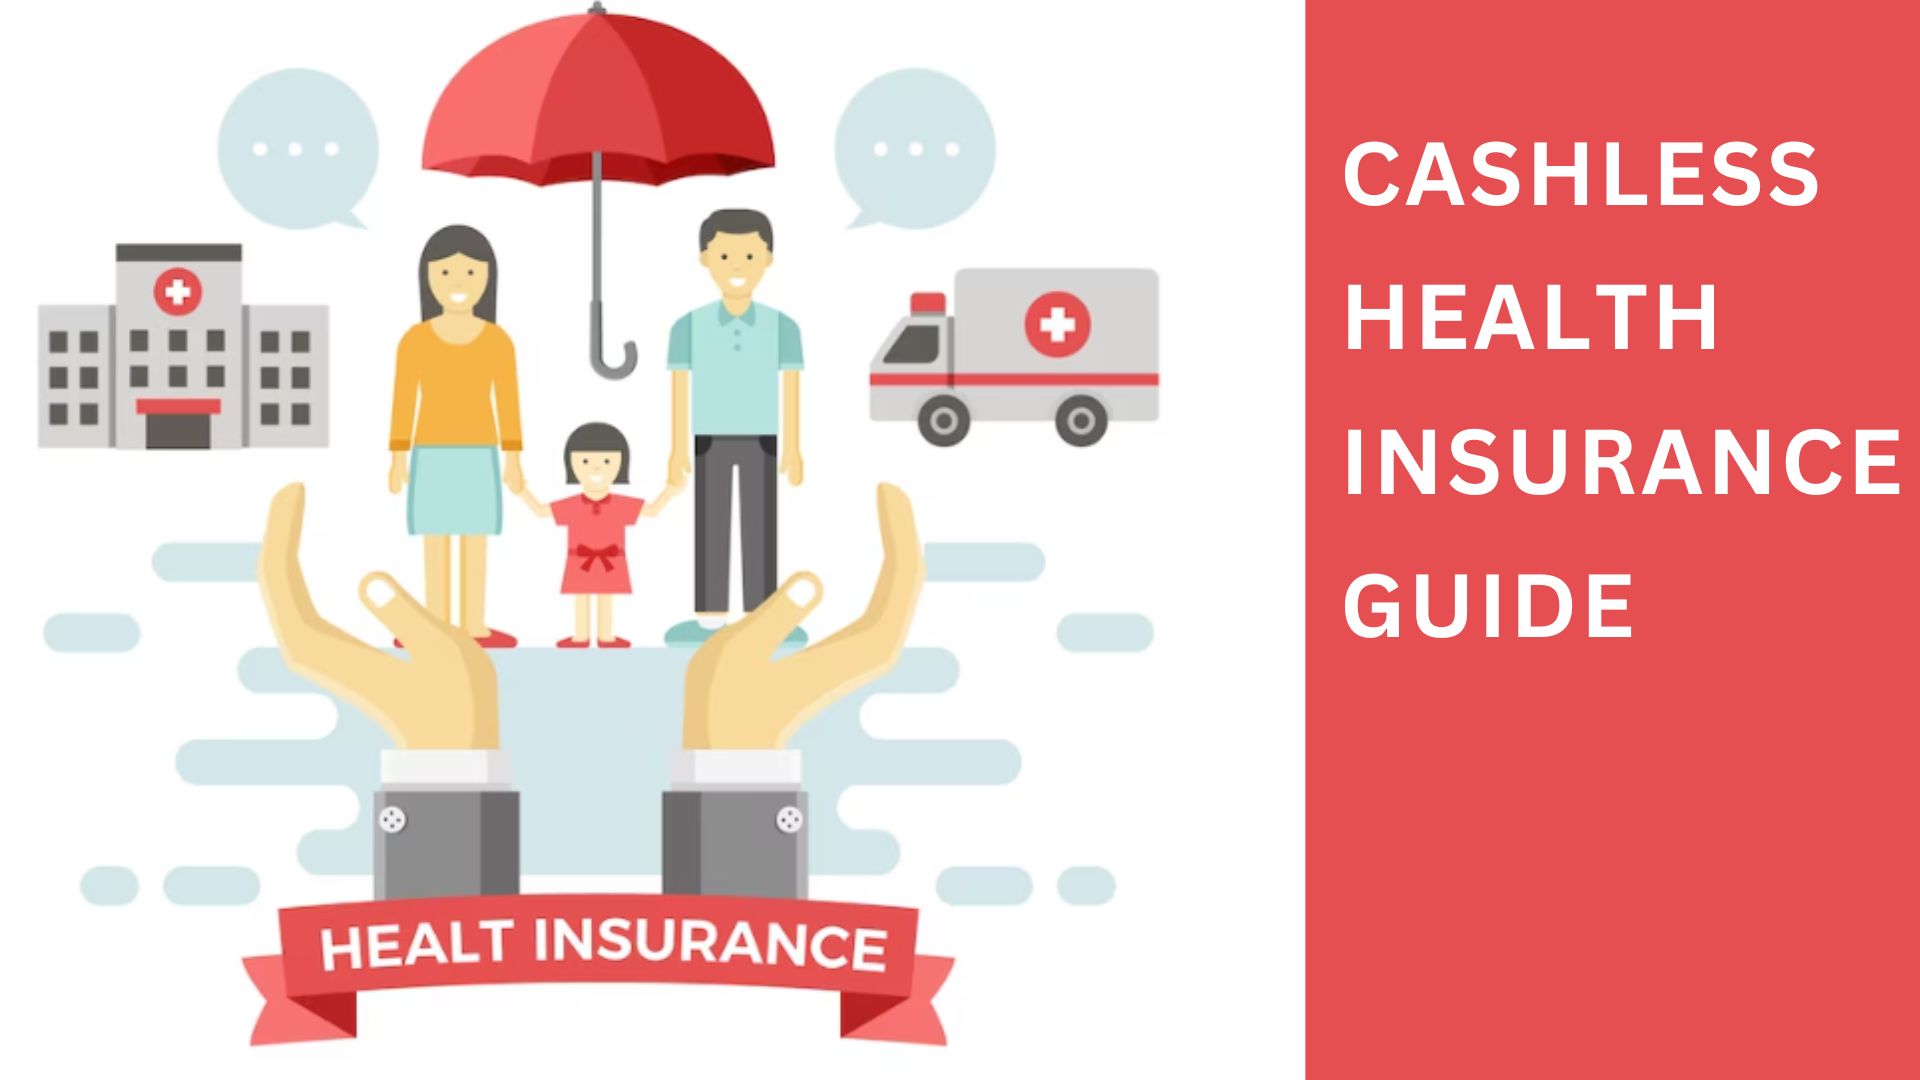 Quick Guide to Easily Accessing Cashless Health Insurance in Emergencies